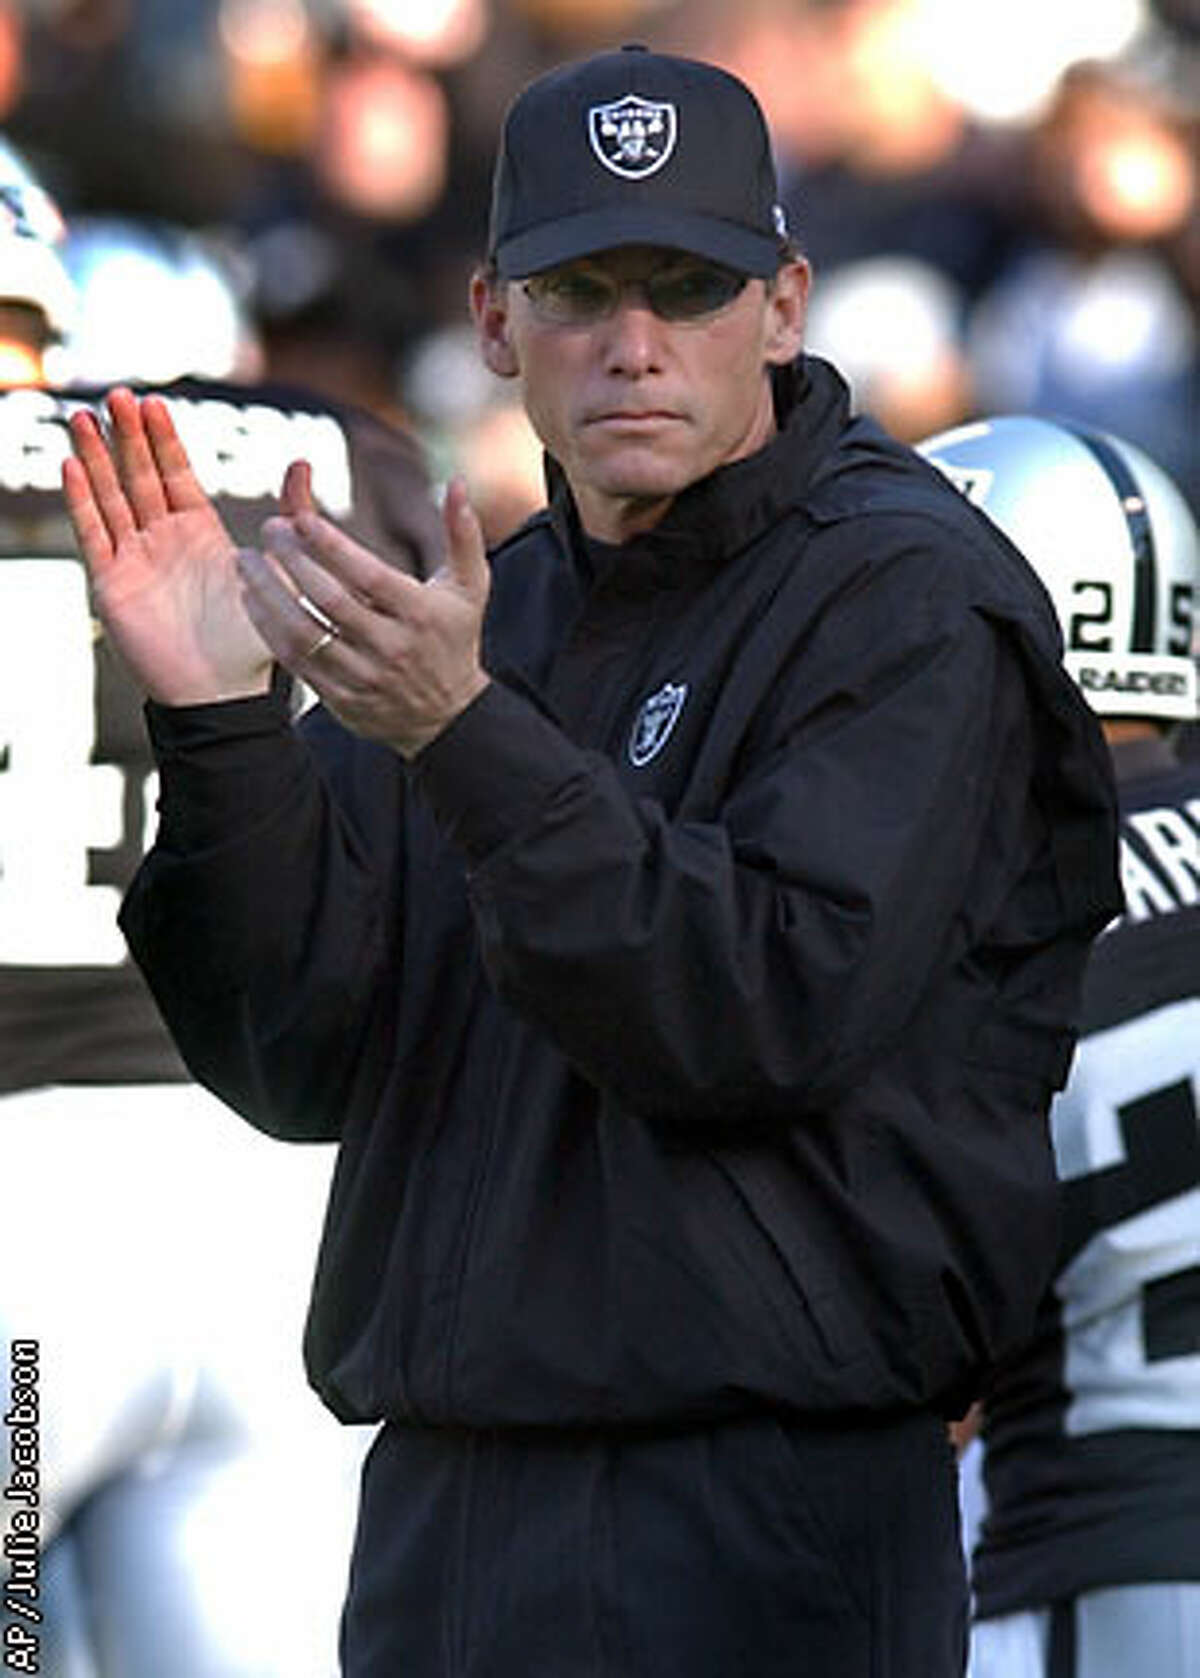 Raiders offensive coordinator Marc Trestman says he aspires to be a head coach. Associated Press photo by Julie Jacobson